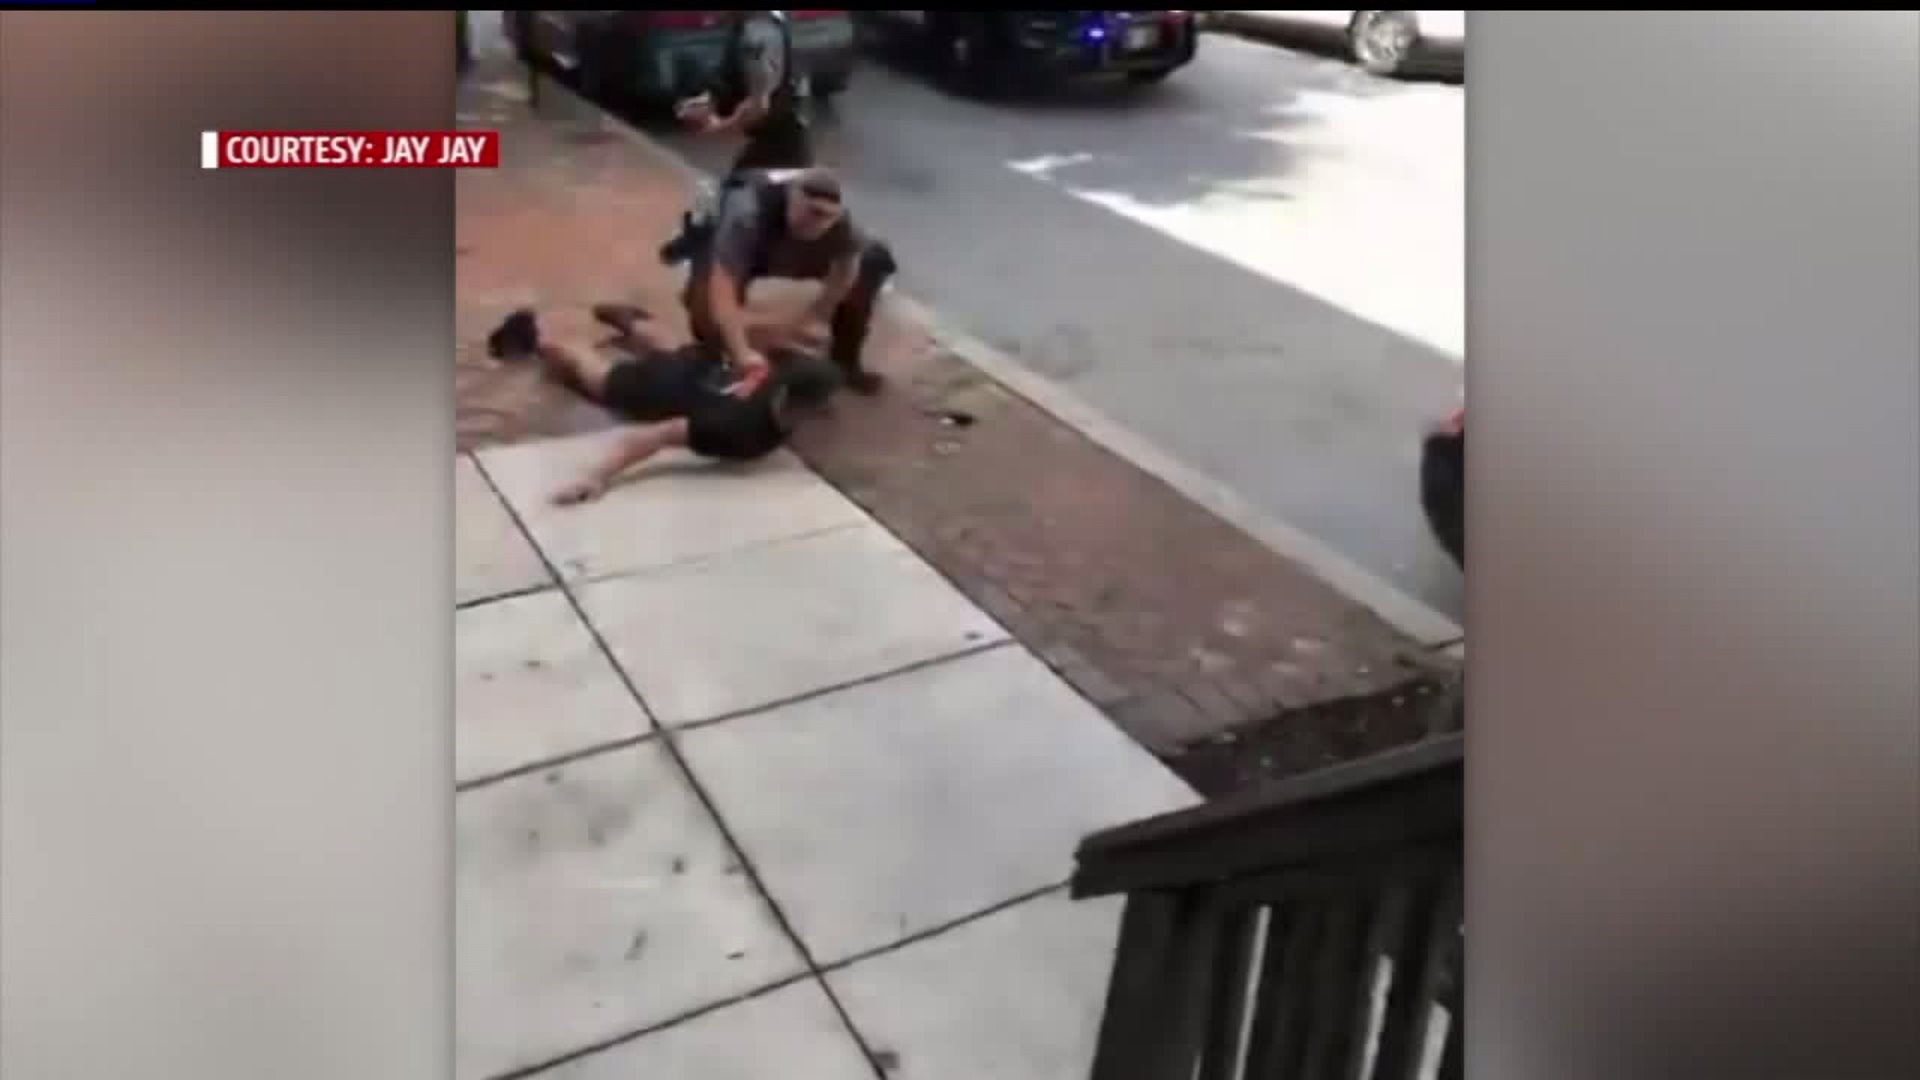 Lancaster officer will not face disciplinary action following tasing incident